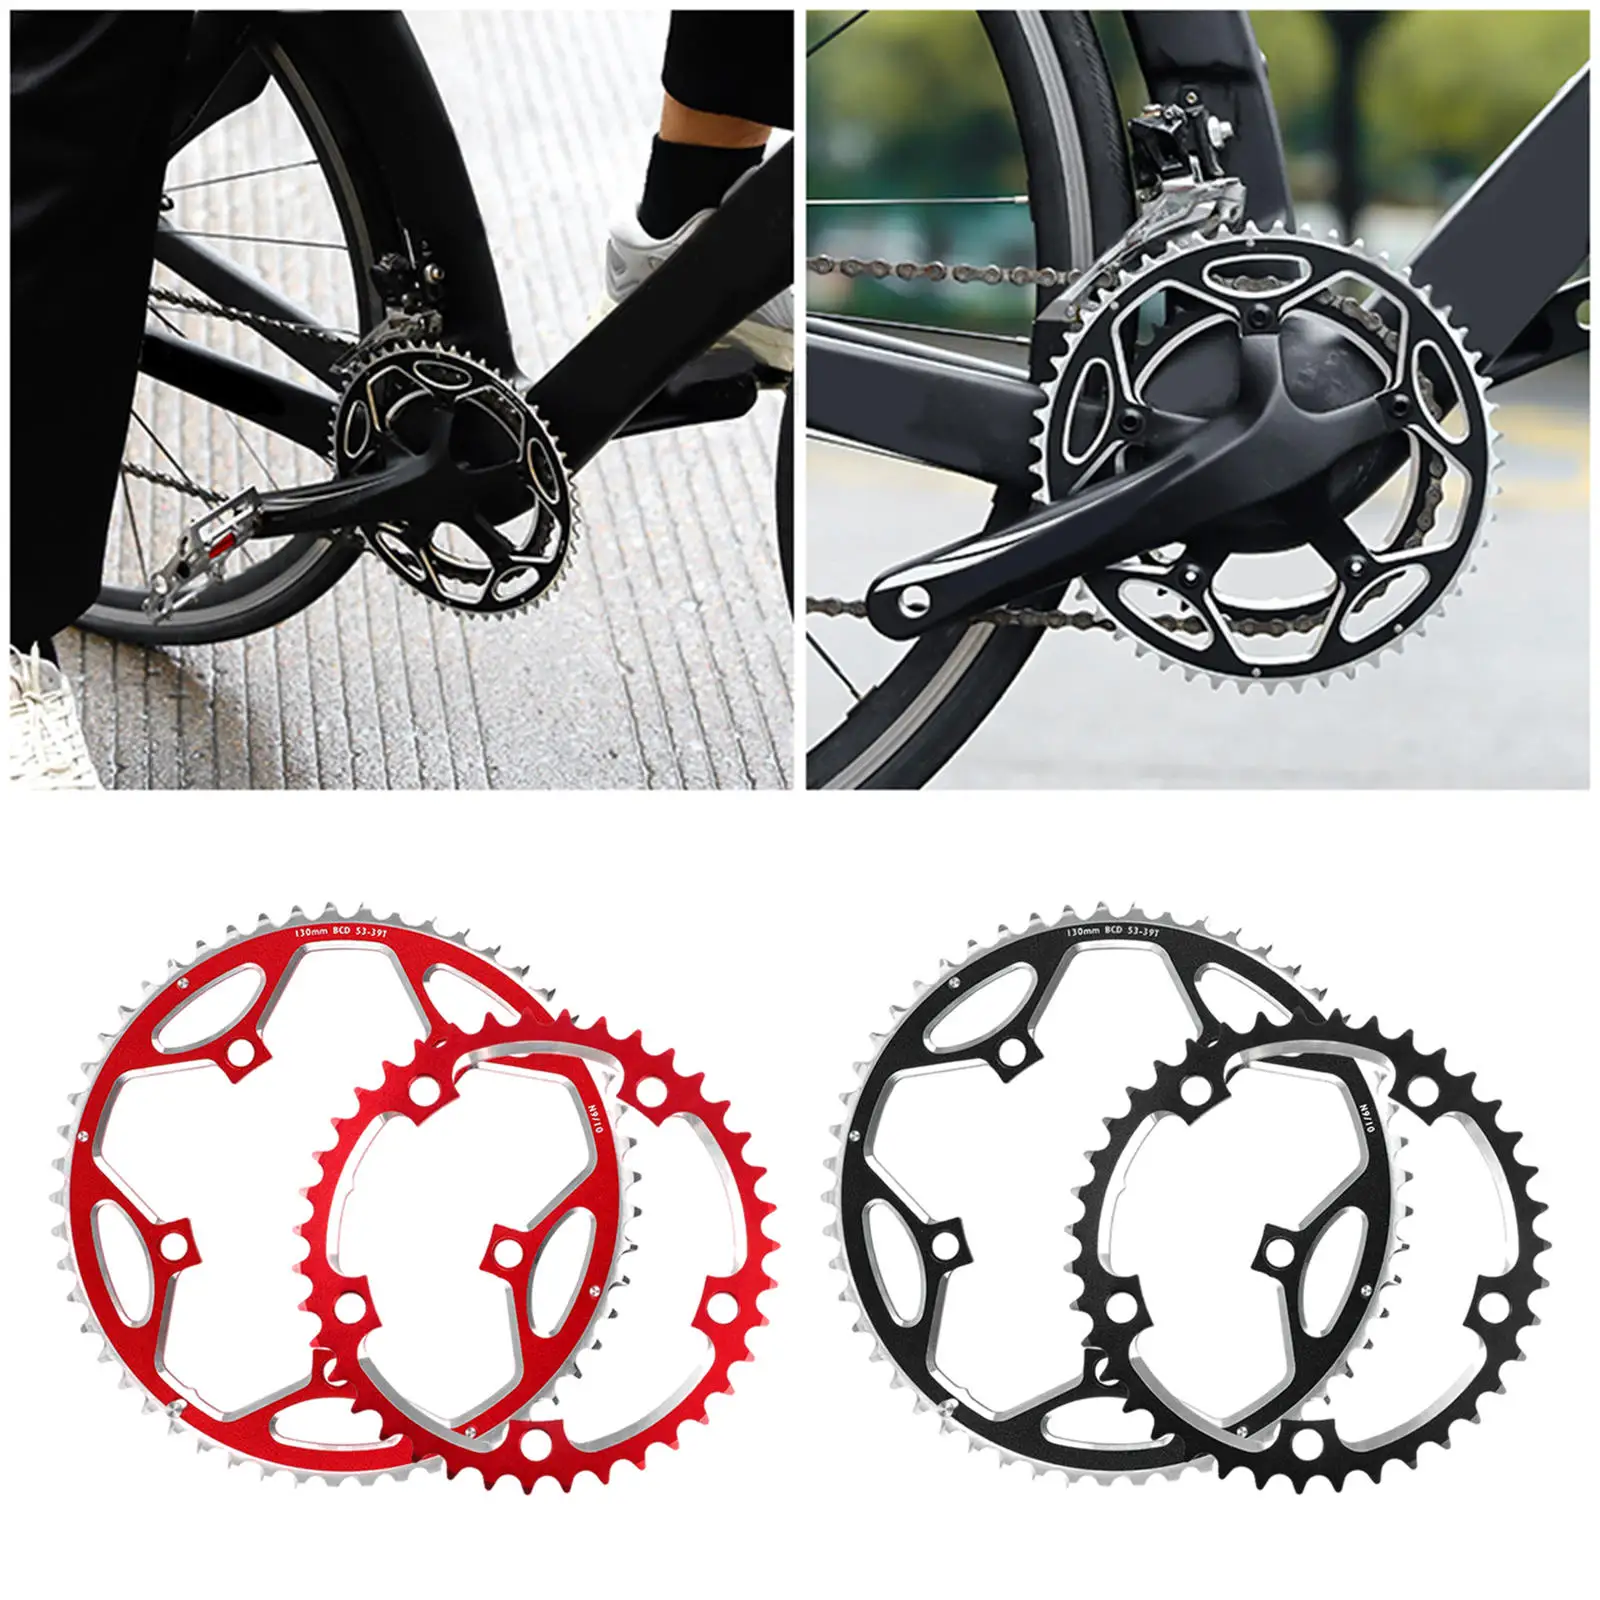 Chainring for Road Bike CNC Machined Aluminum Alloy 130mm BCD Round Bicycle Chainring for 8/9/10/11 Speed Road Bike Parts Repair